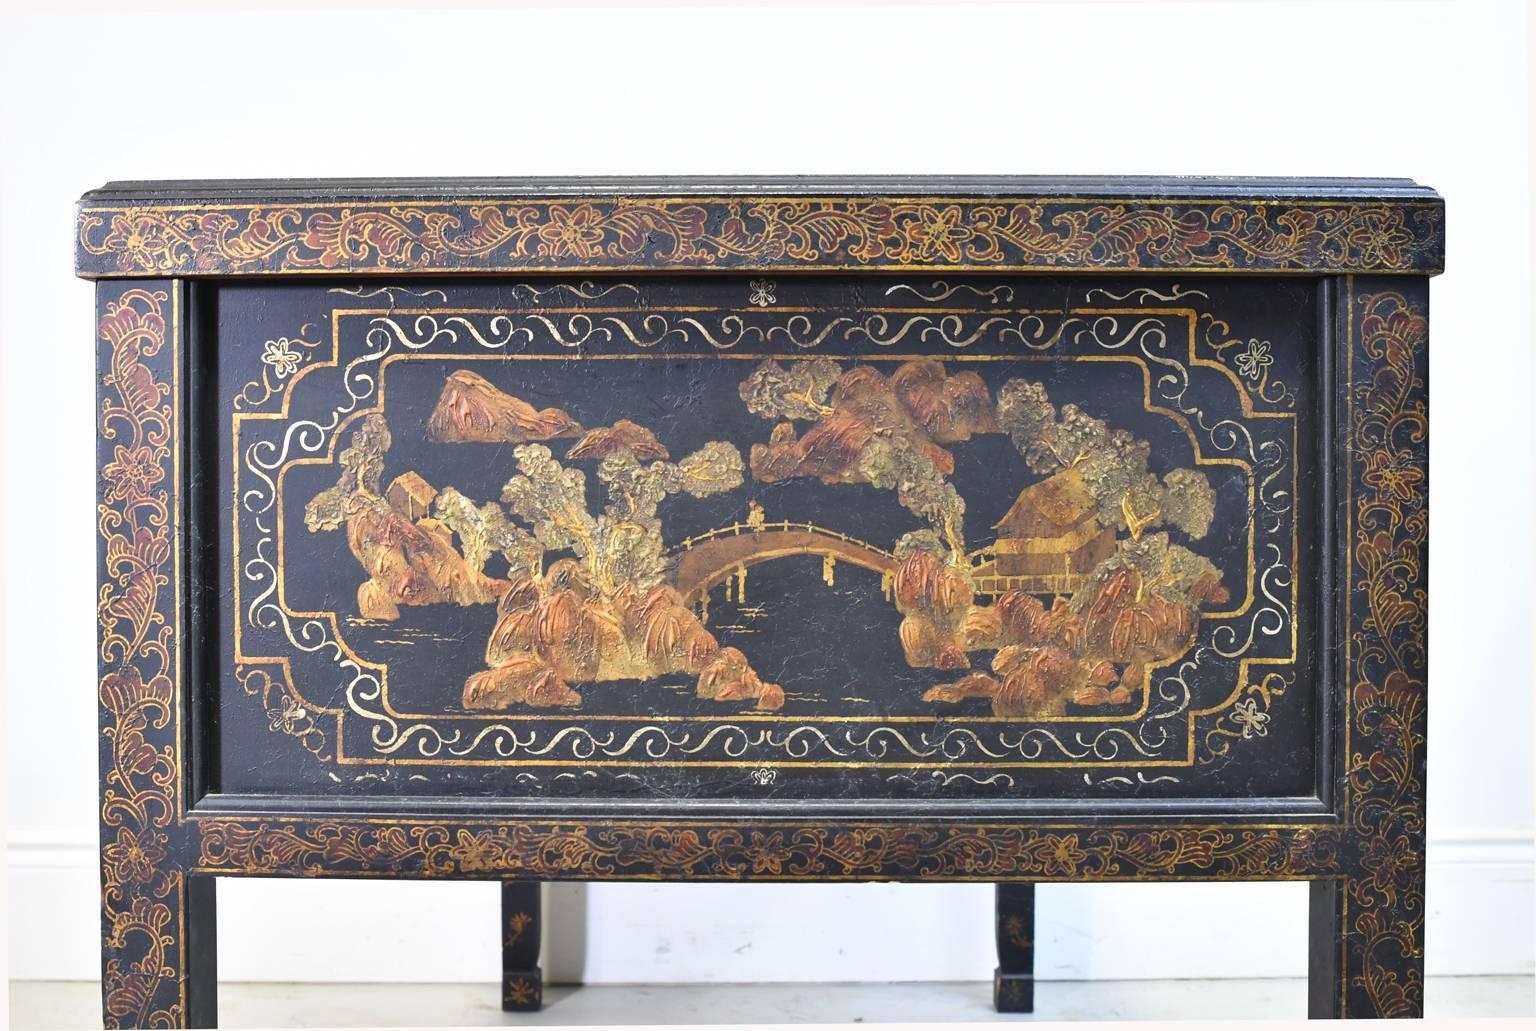 20th Century Queen Anne Revival English Chinoiserie Desk by John Widdicomb 1